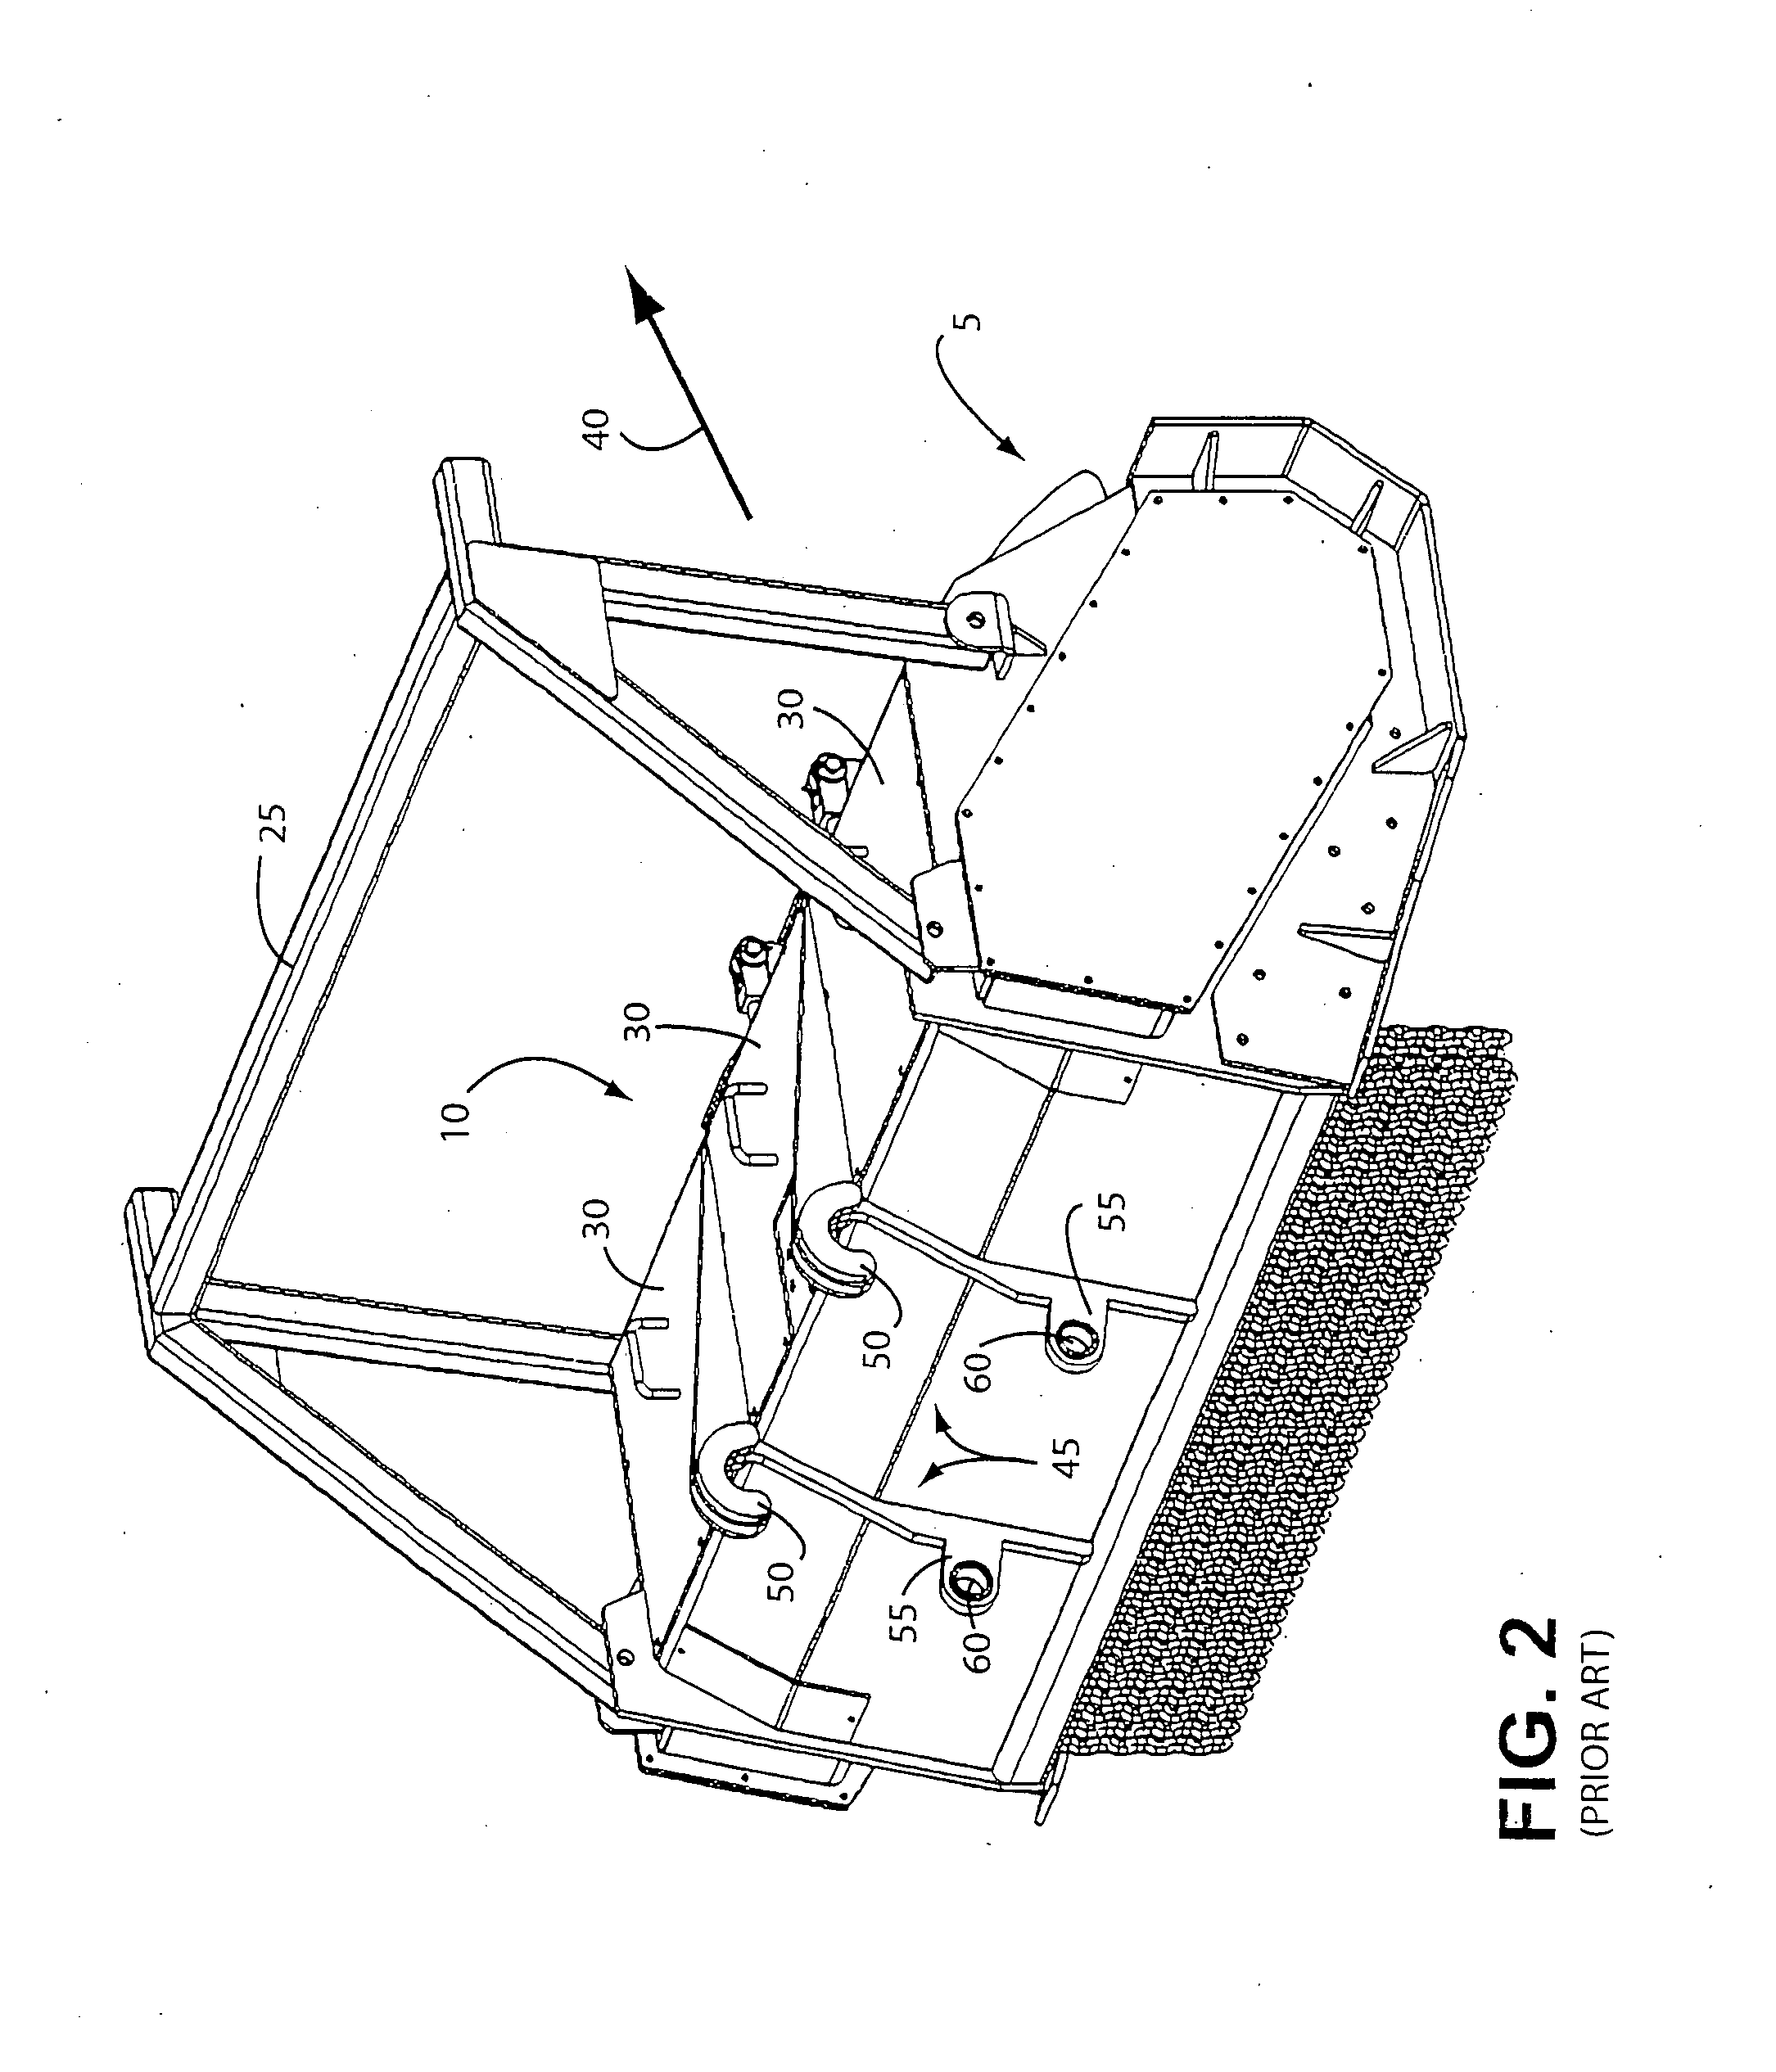 Cutter head with multiple mounts, bushing assembly and/or cooler assembly